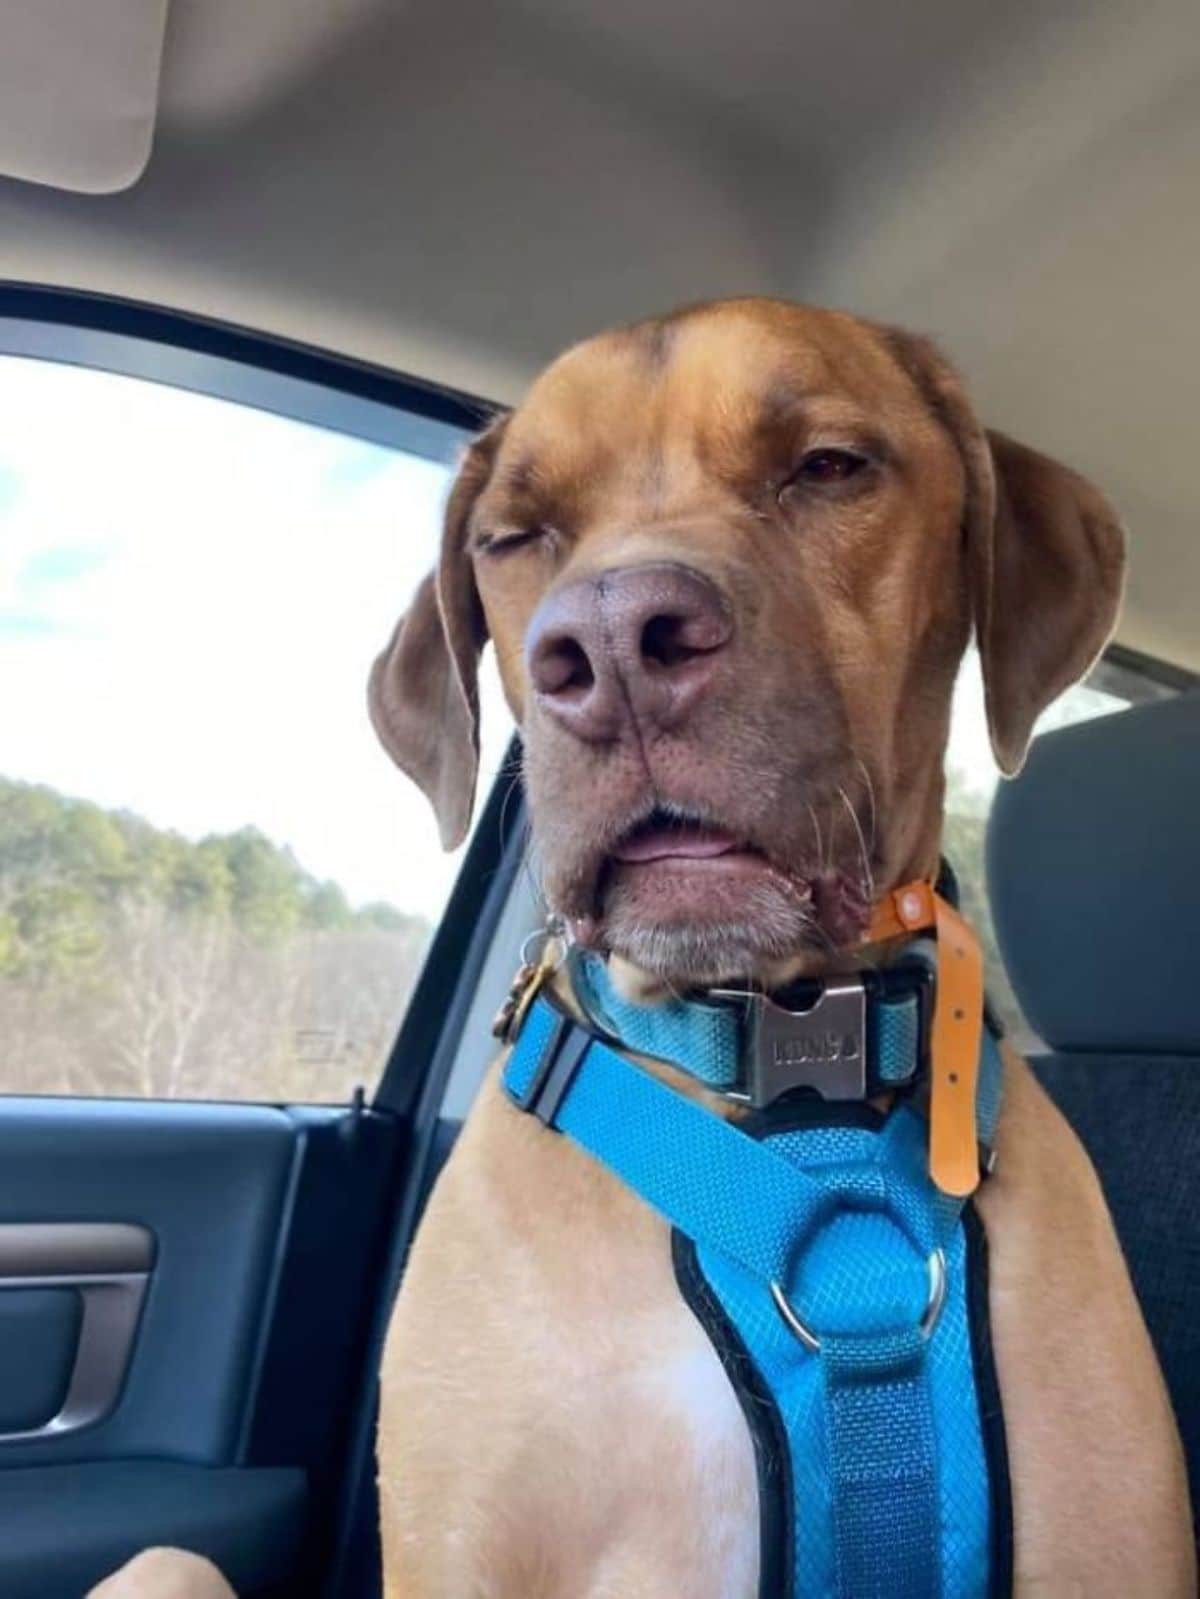 brown dog wearing a blue harness sitting on the passenger seat of a car with the mouth slightly open